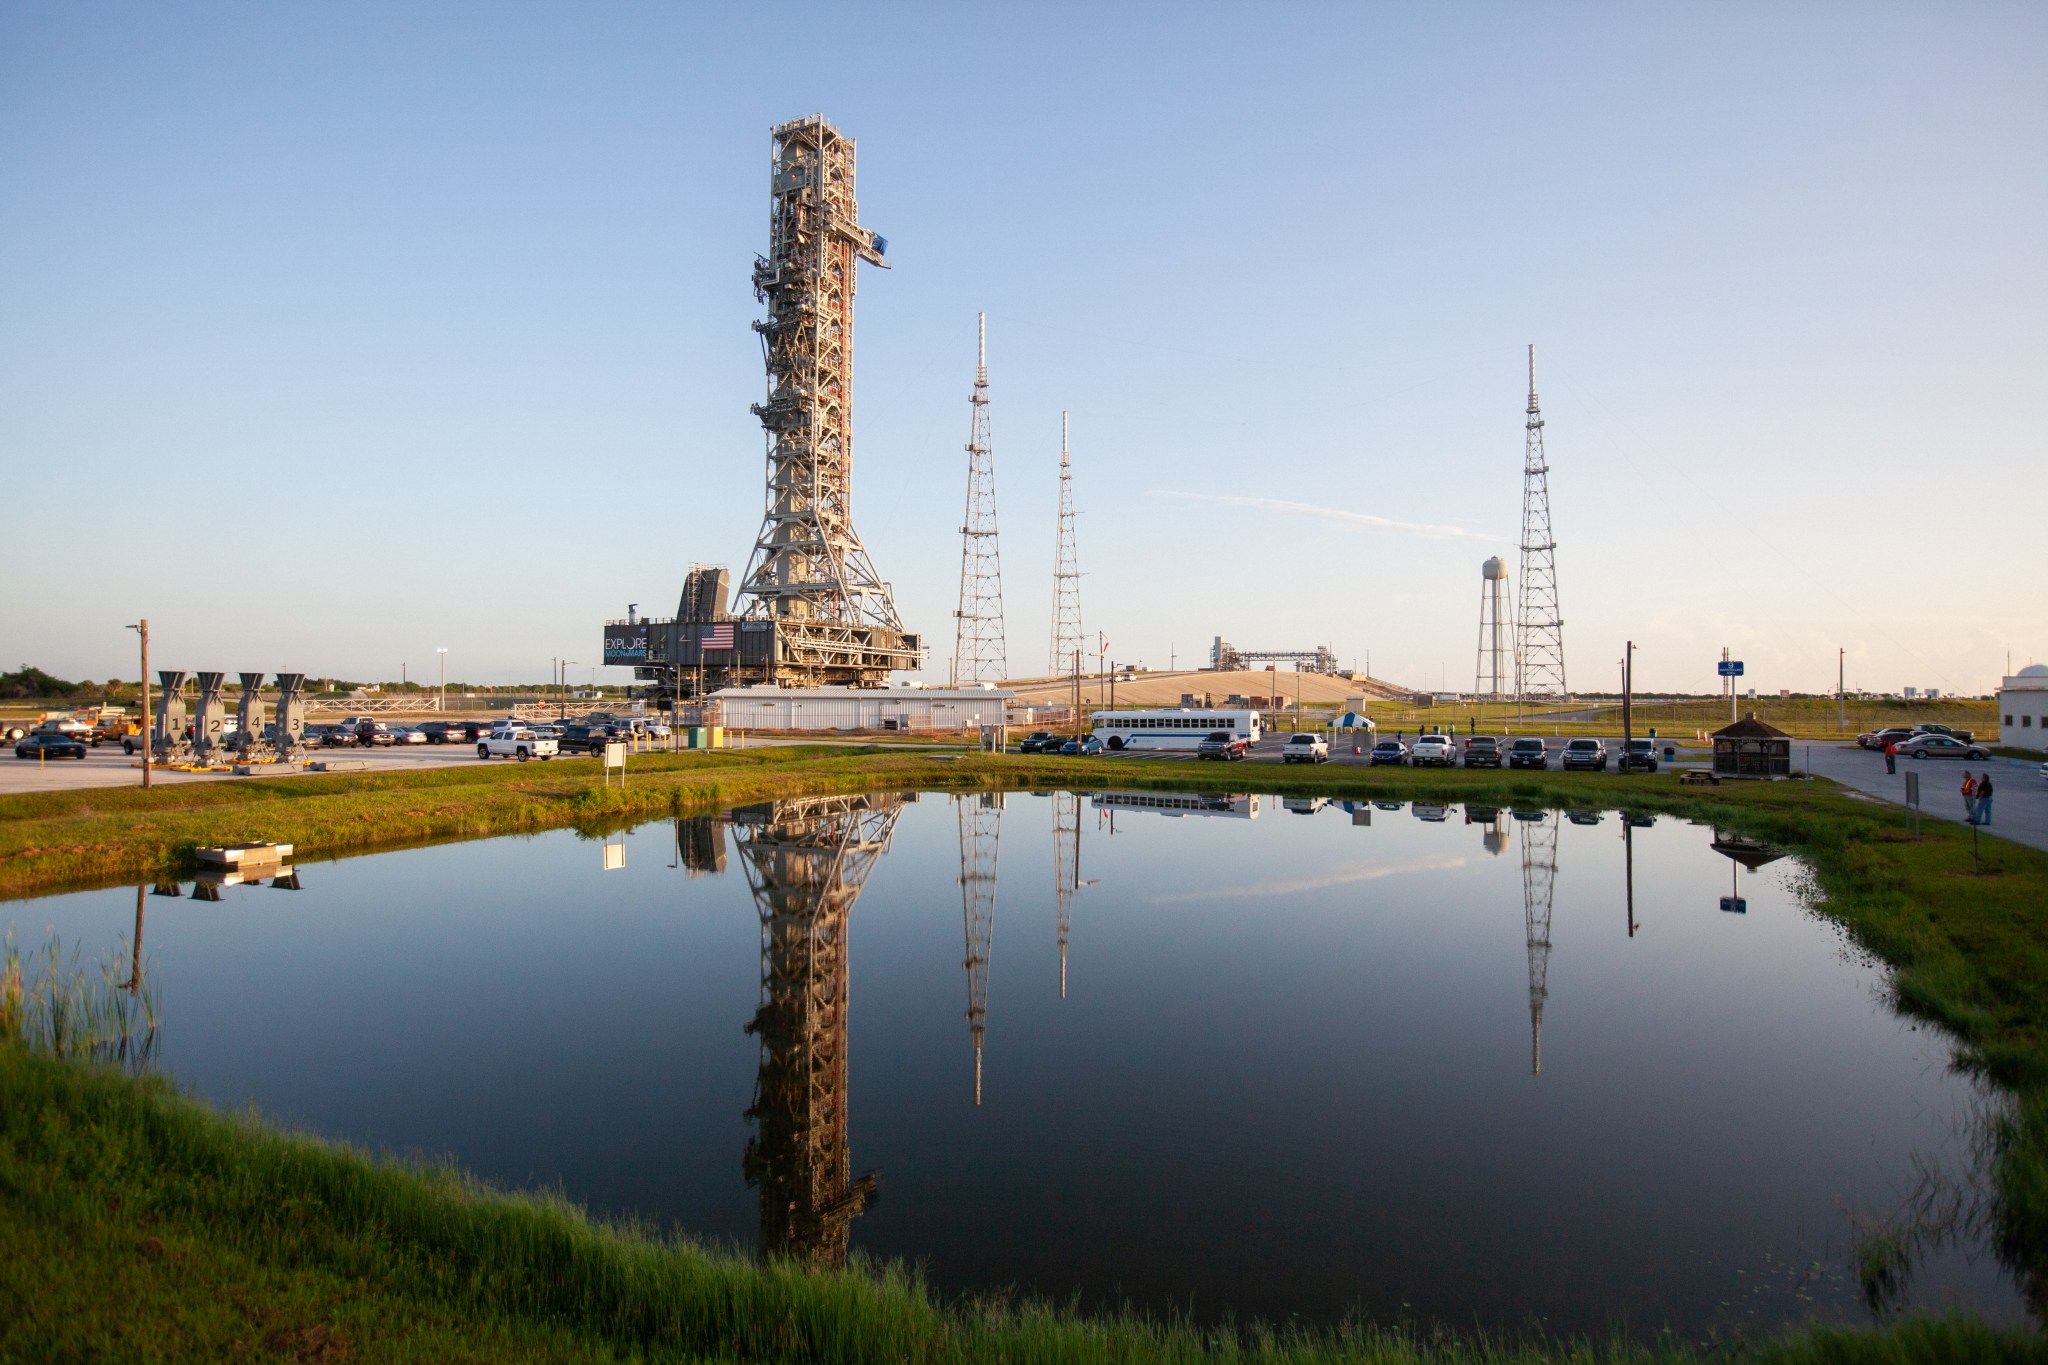 NASA's mobile launcher continues its journey up the pad surface at Launch Complex 39B on June 28, 2019.